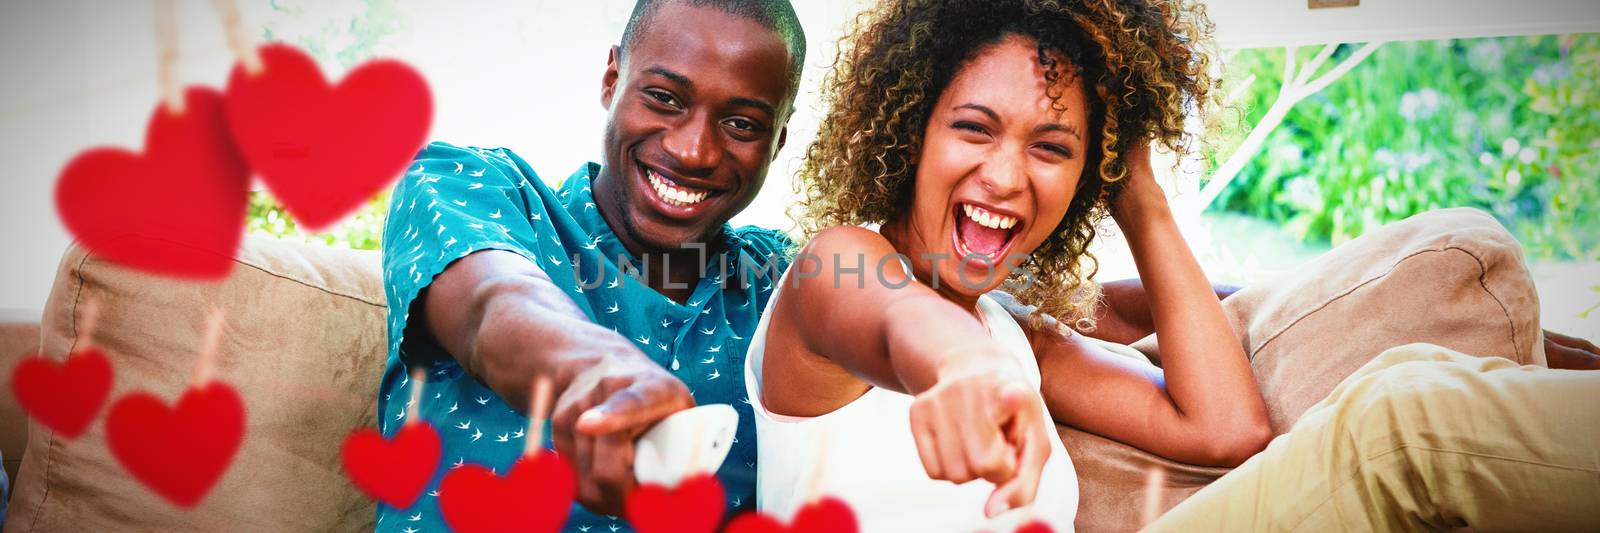 Hearts hanging on a line against happy young couple watching television